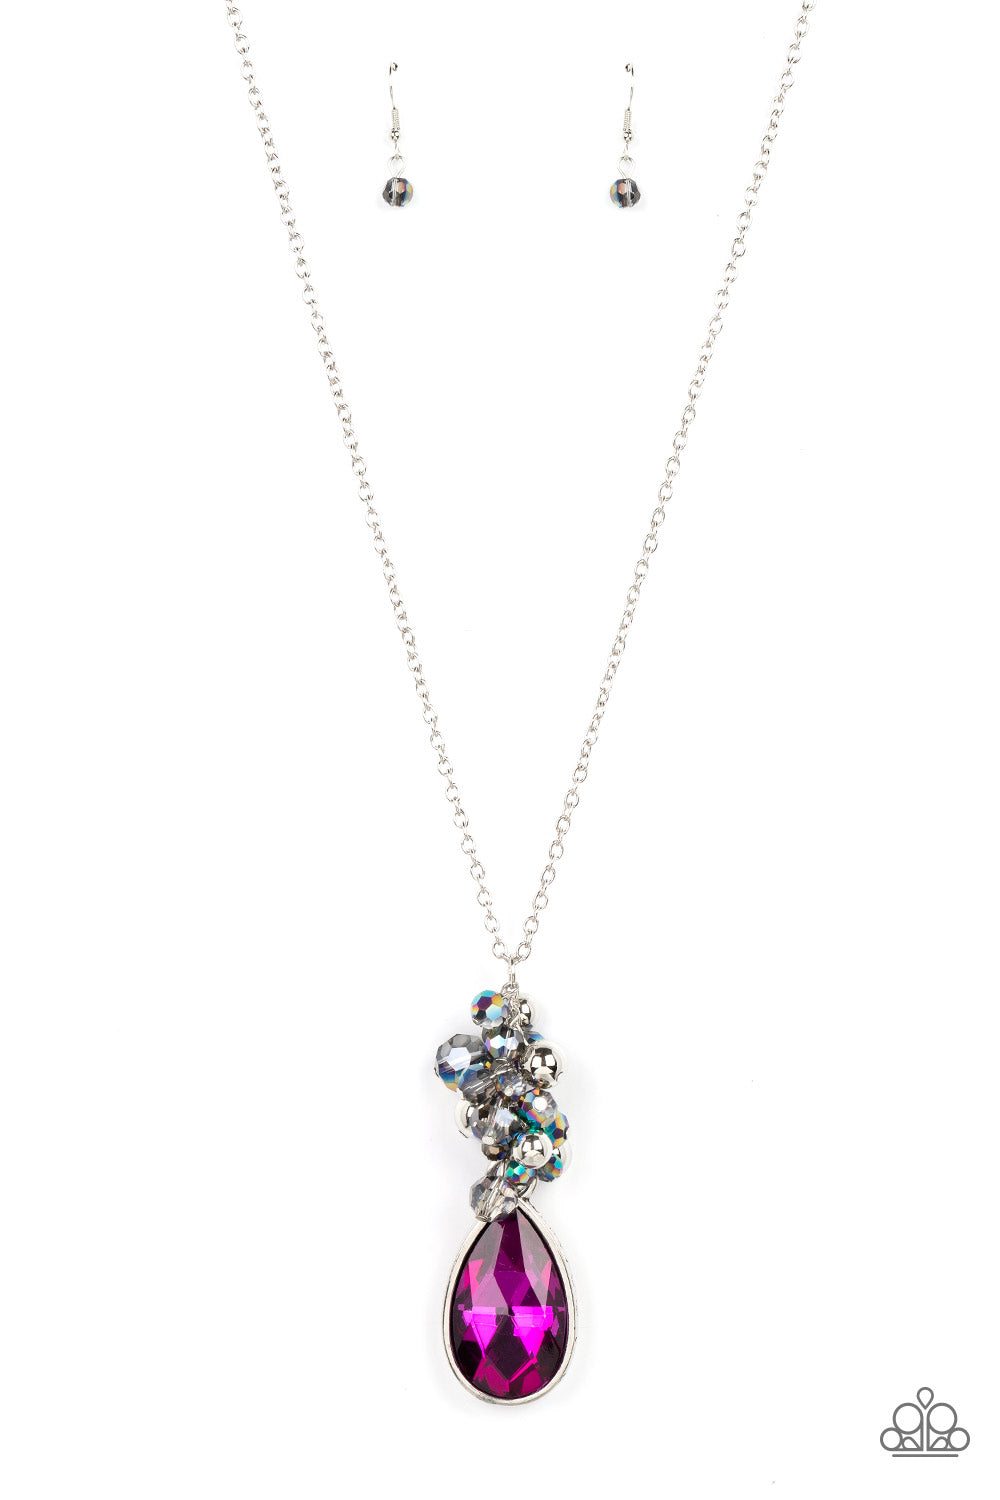 Paparazzi Accessories Colorful Convergence - Multi A dramatically oversized teardrop gem sparkles at the bottom of a cluster of silver beads, smoky crystal-like beads, and metallic oil spill accents. The effervescent pendant swings from the bottom of a le